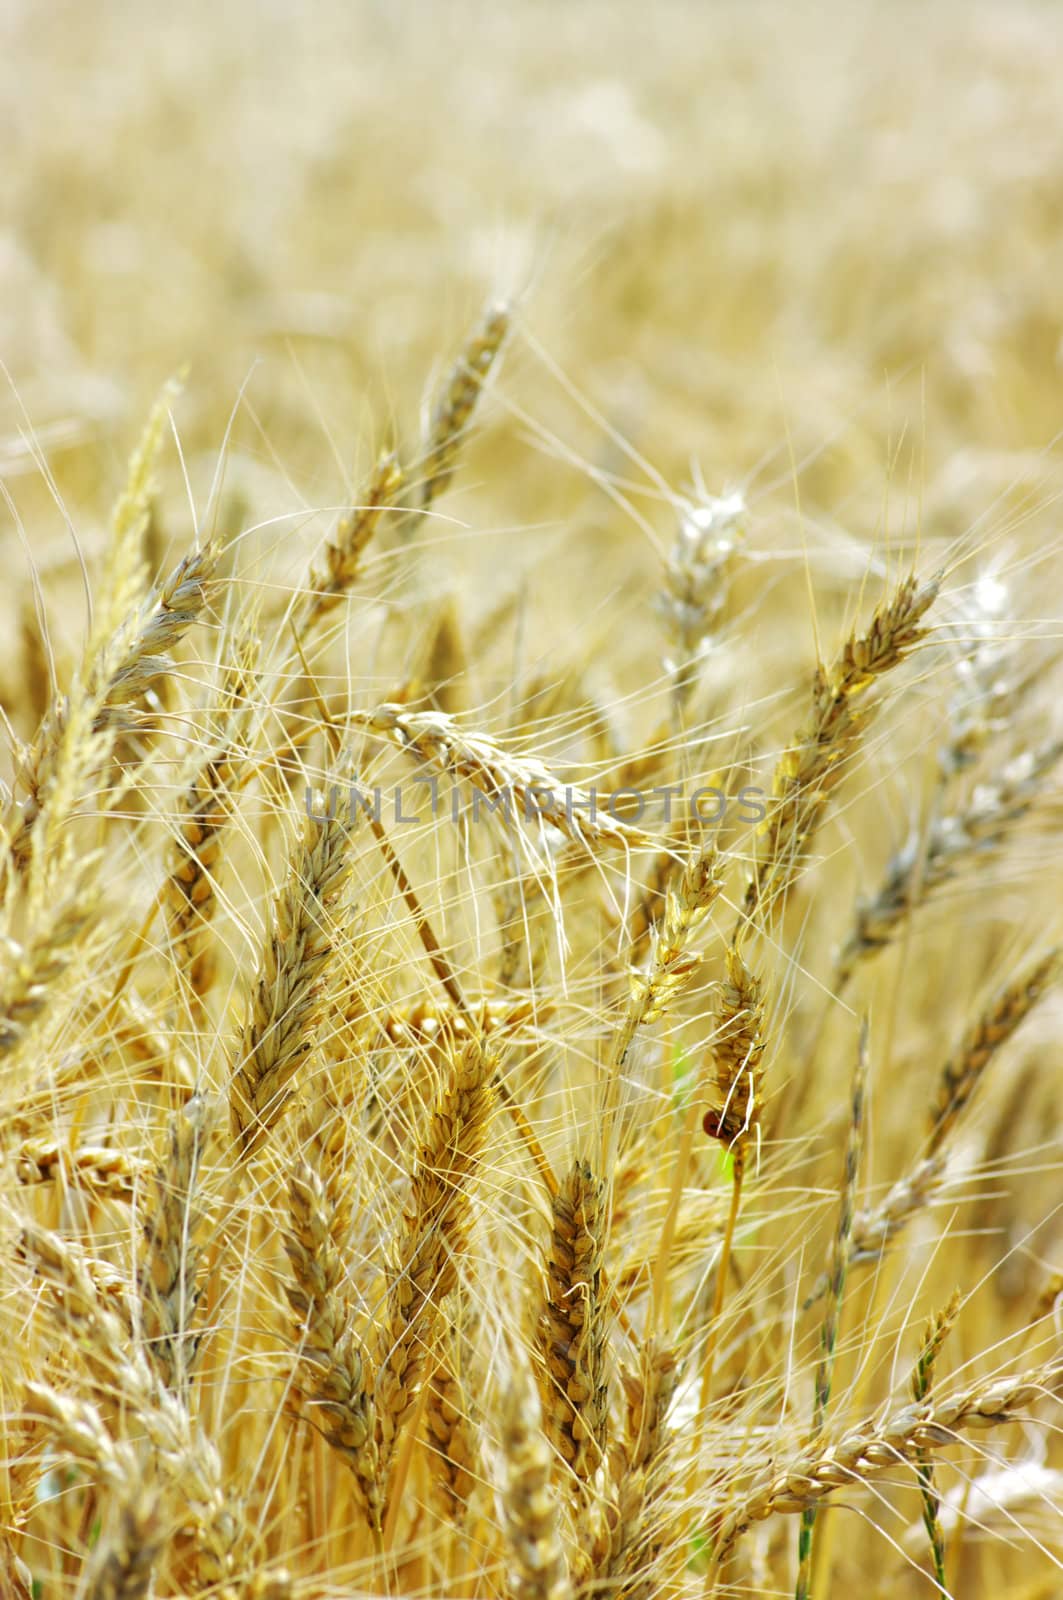 Golden wheat on the plant.